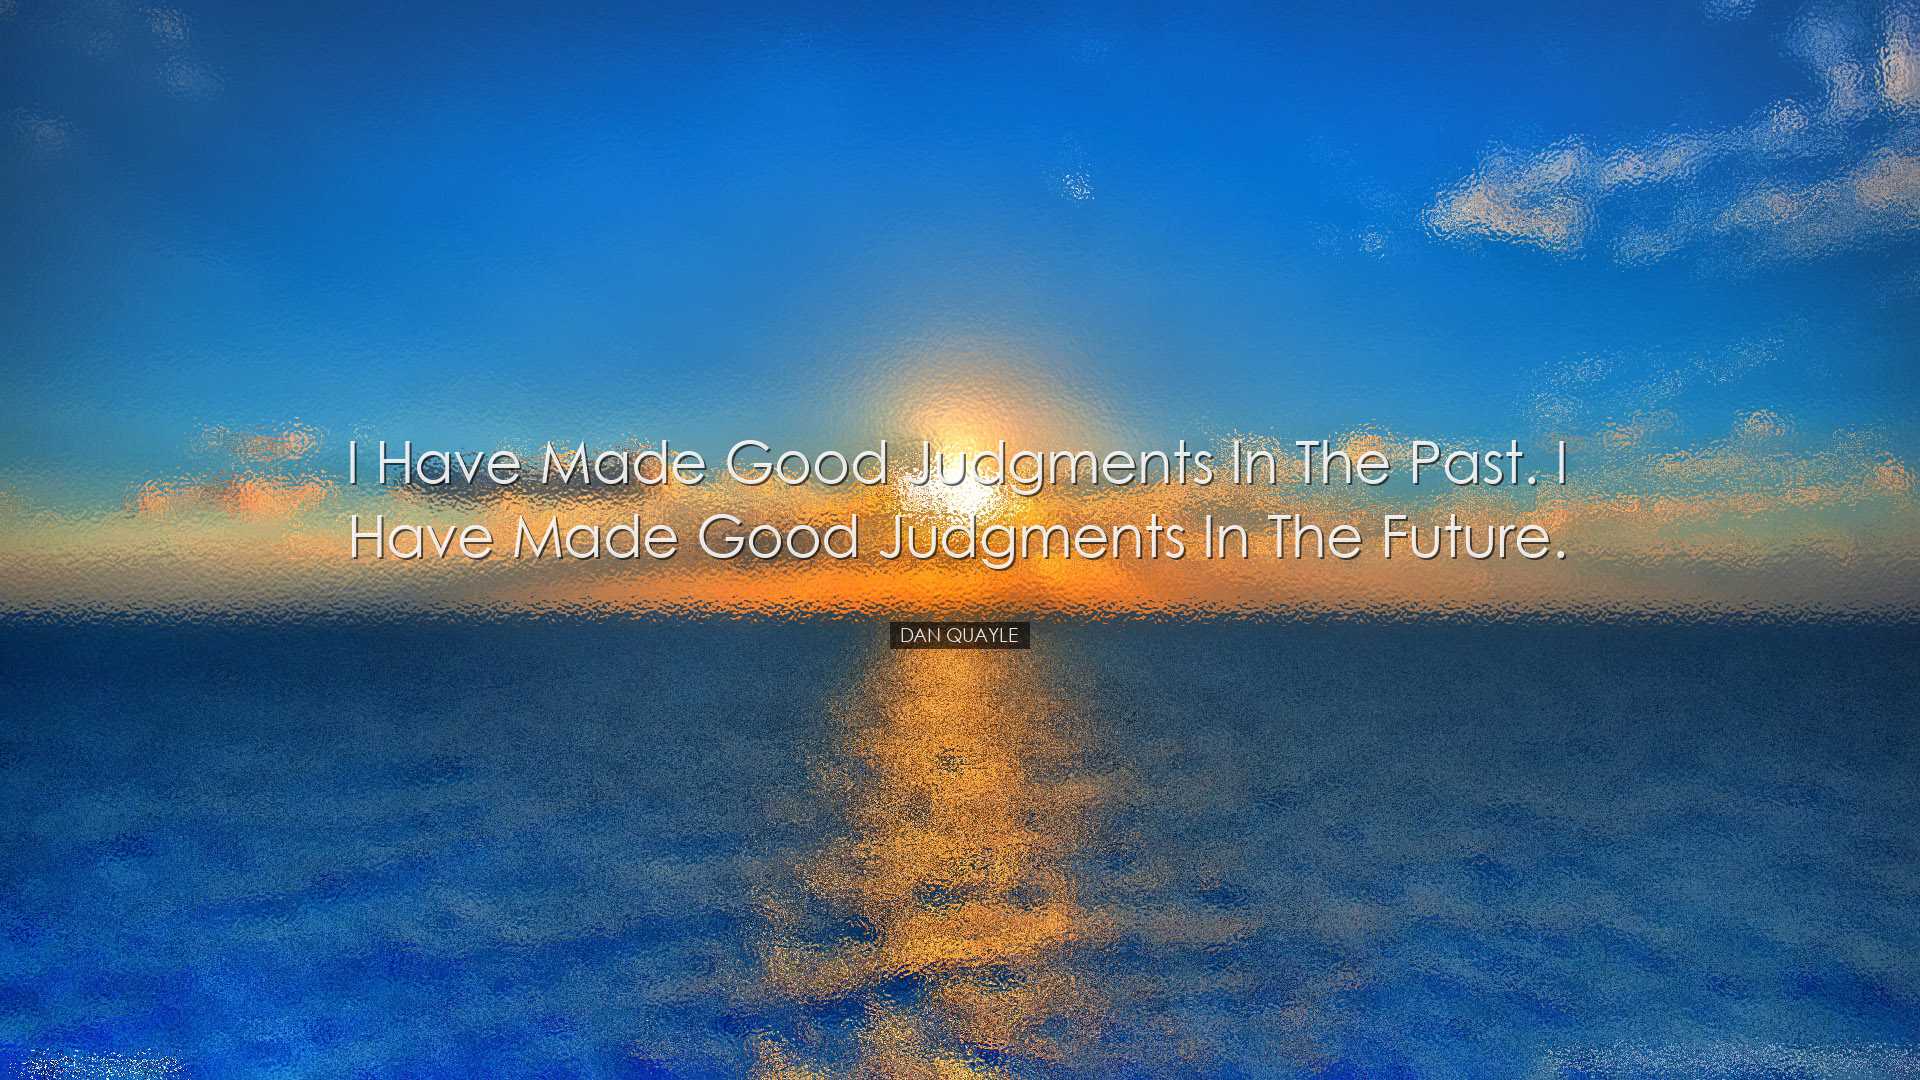 I have made good judgments in the past. I have made good judgments